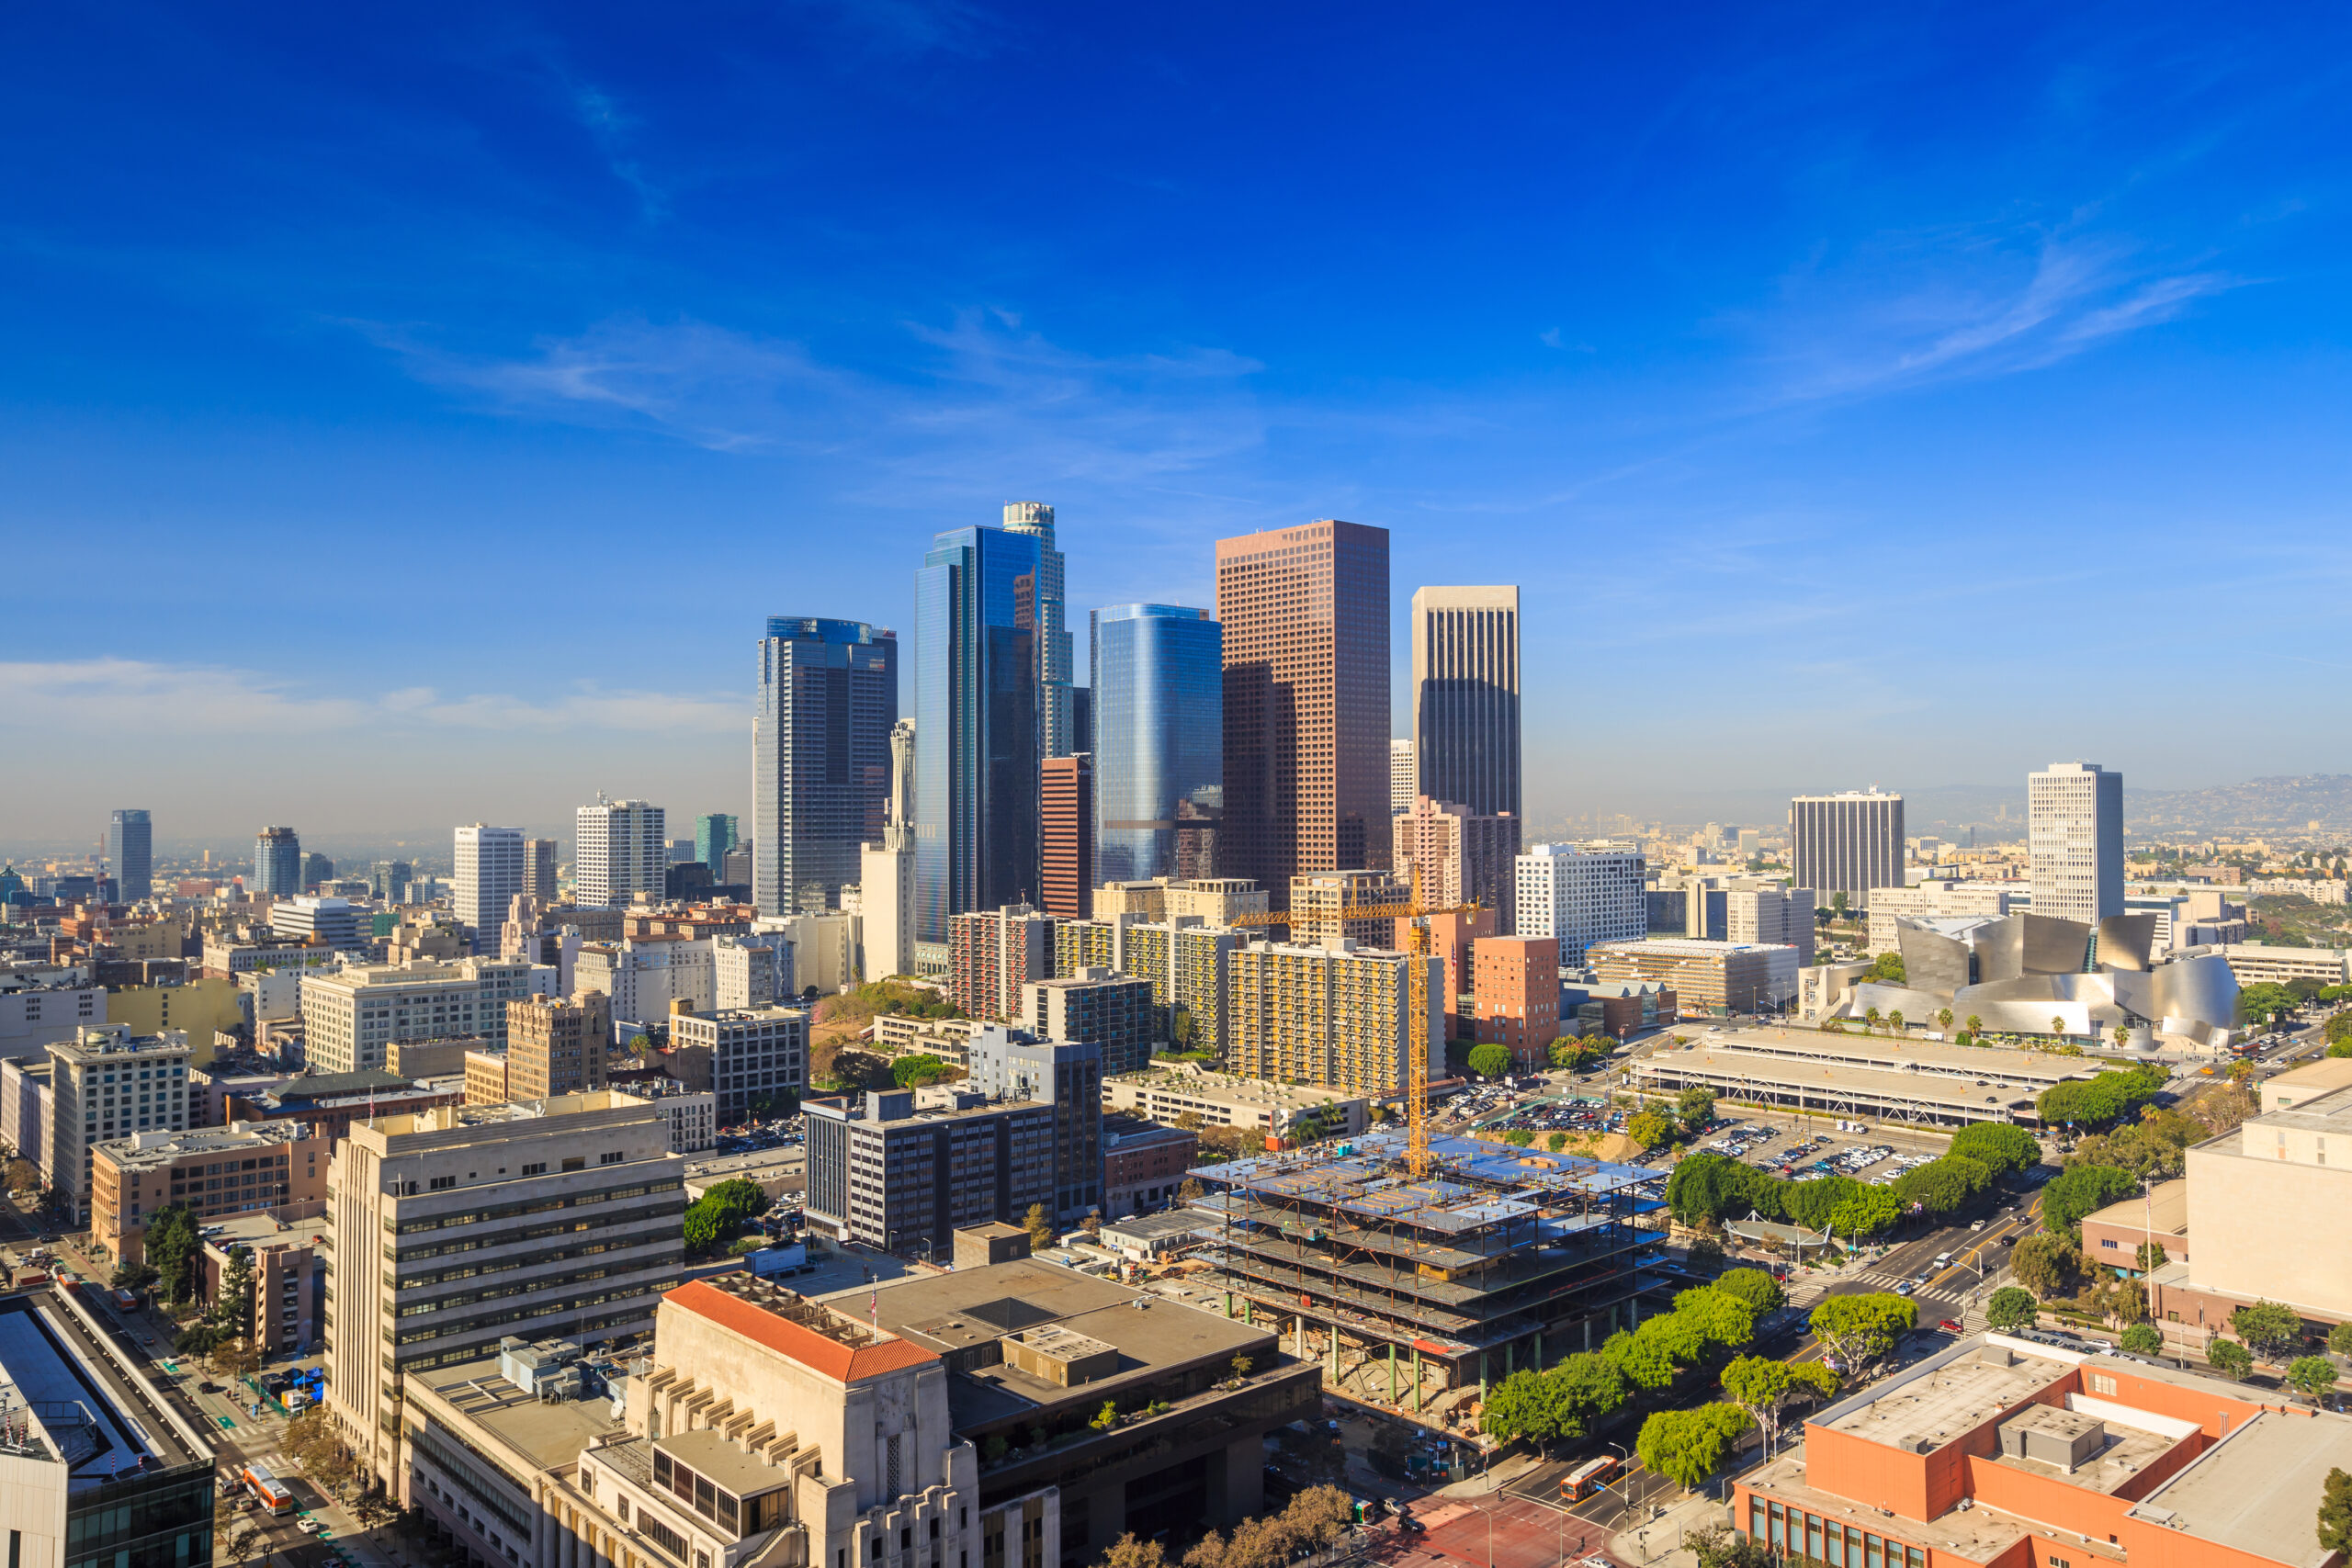 Skyline view of downtown Los Angeles, where Morrison